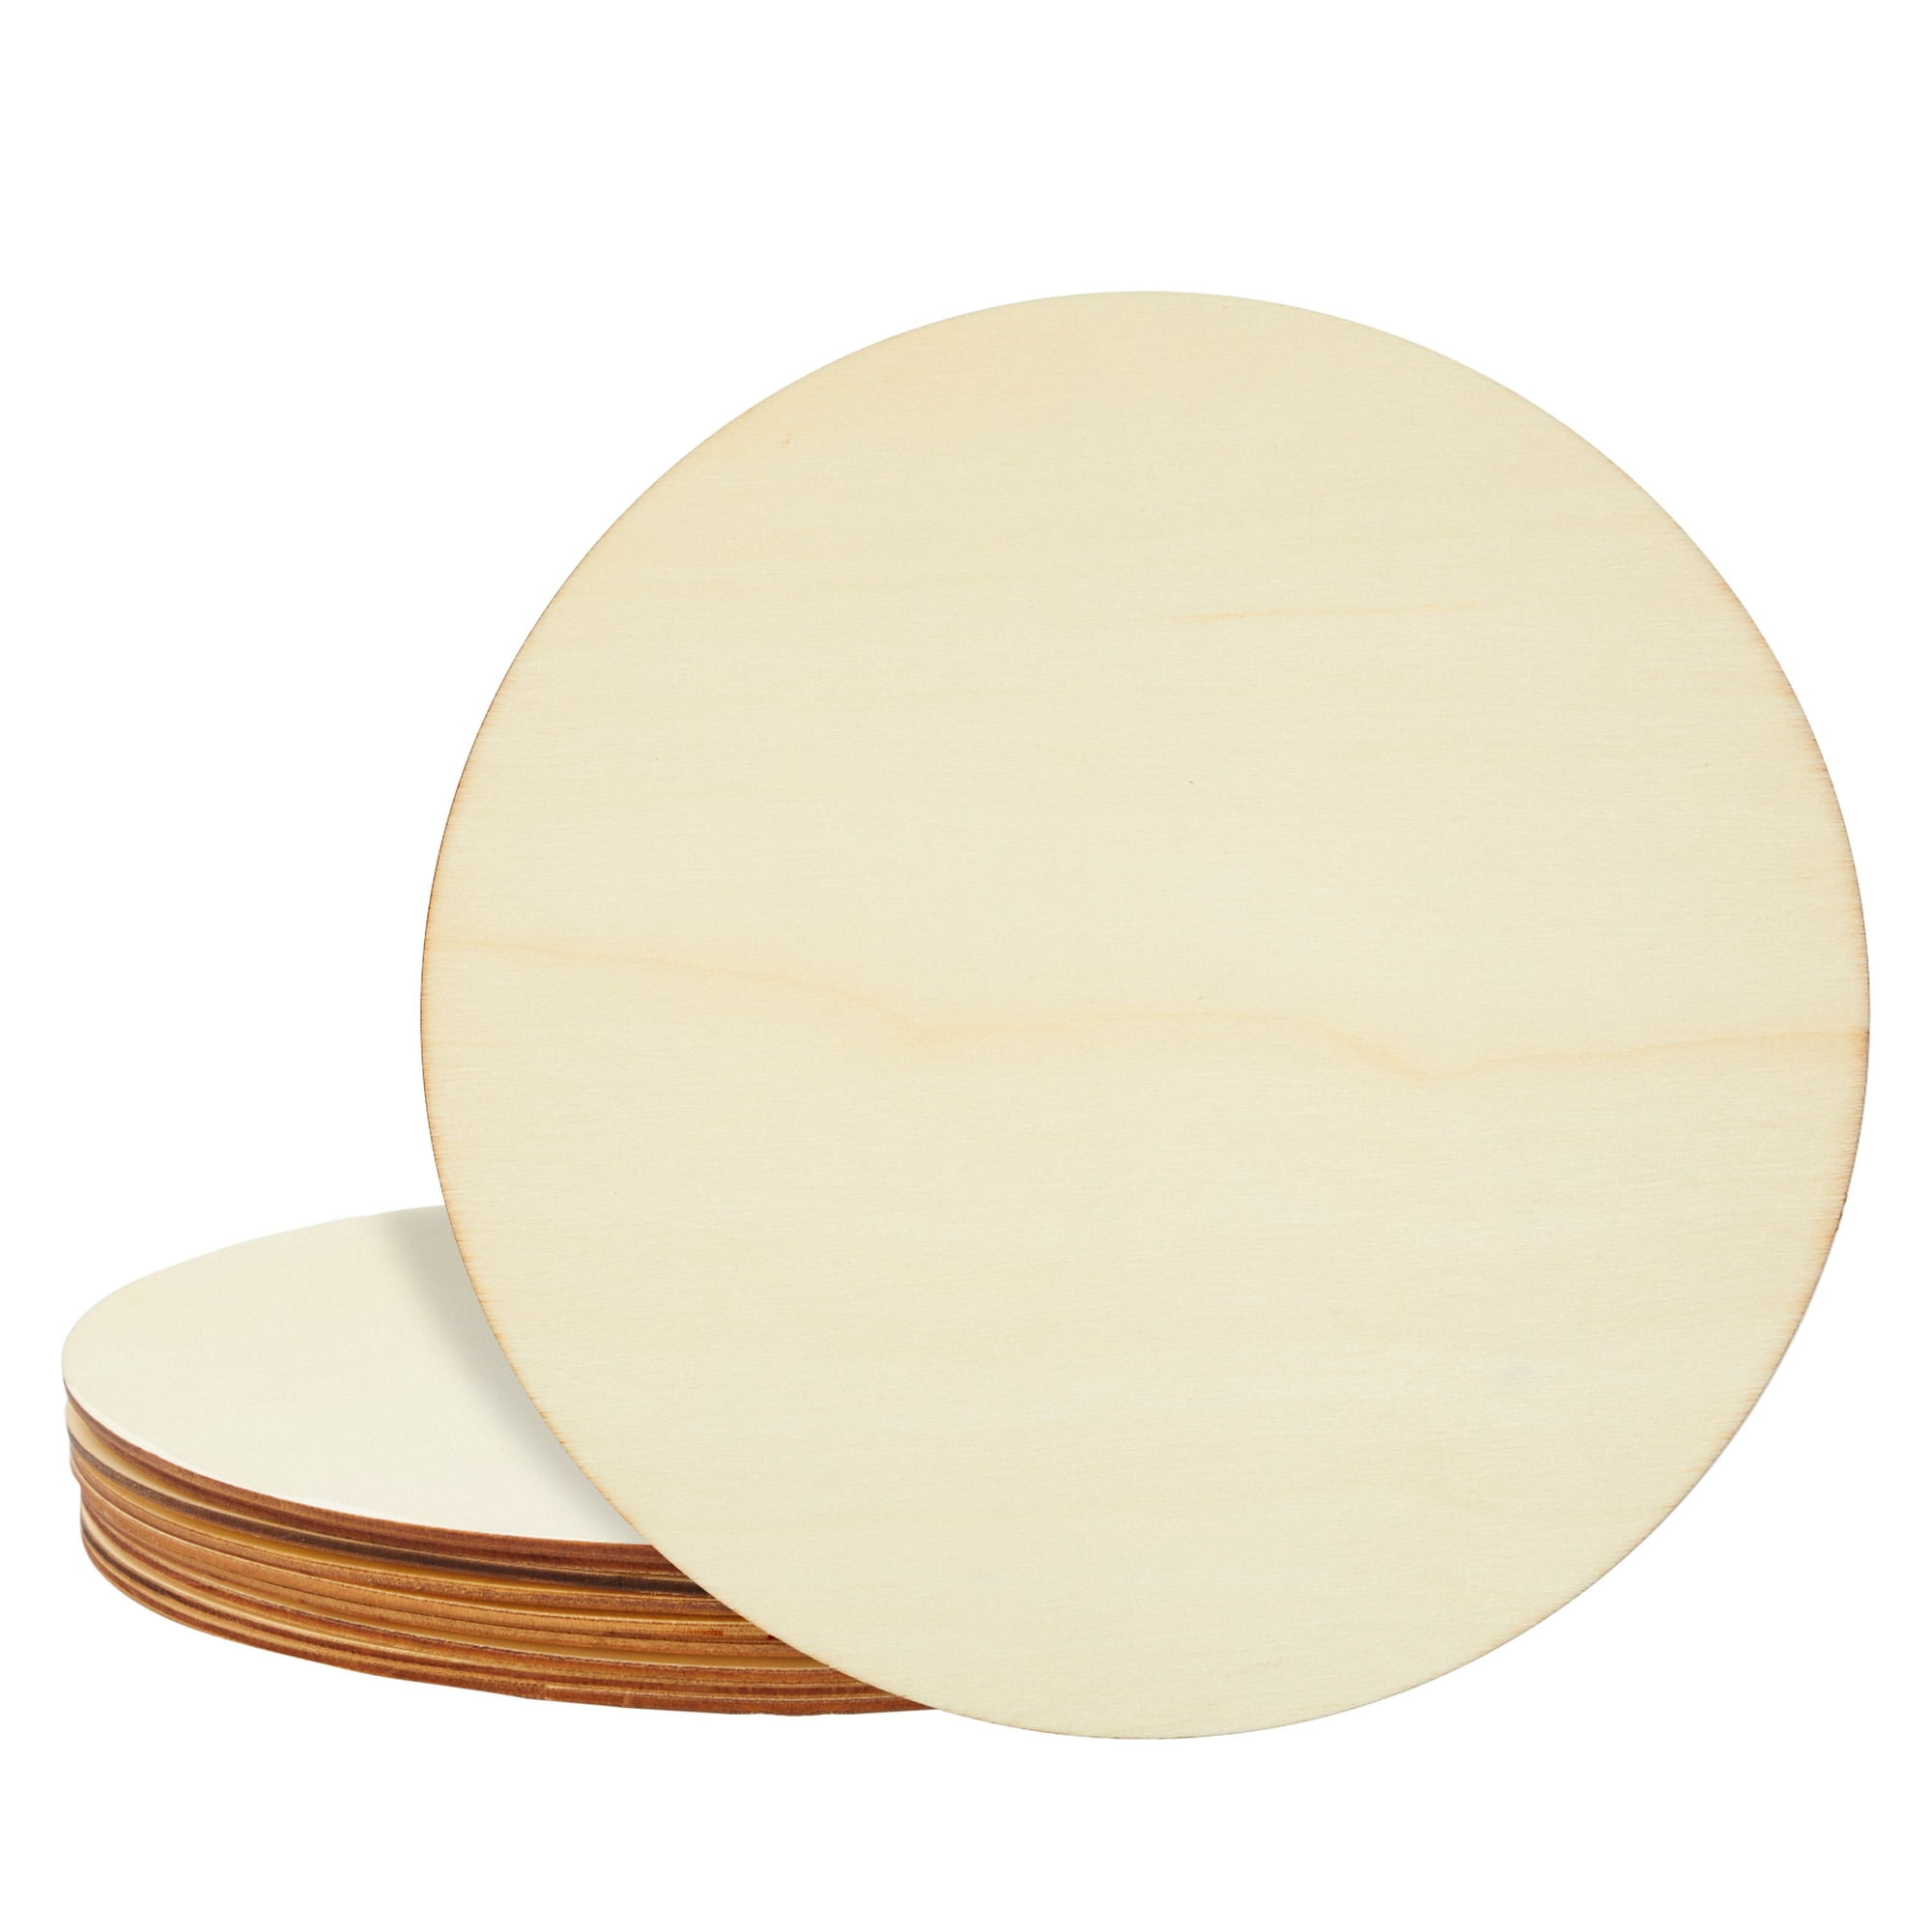 10 Inch Wooden Circles for Crafts, Unfinished Rounds for Wood